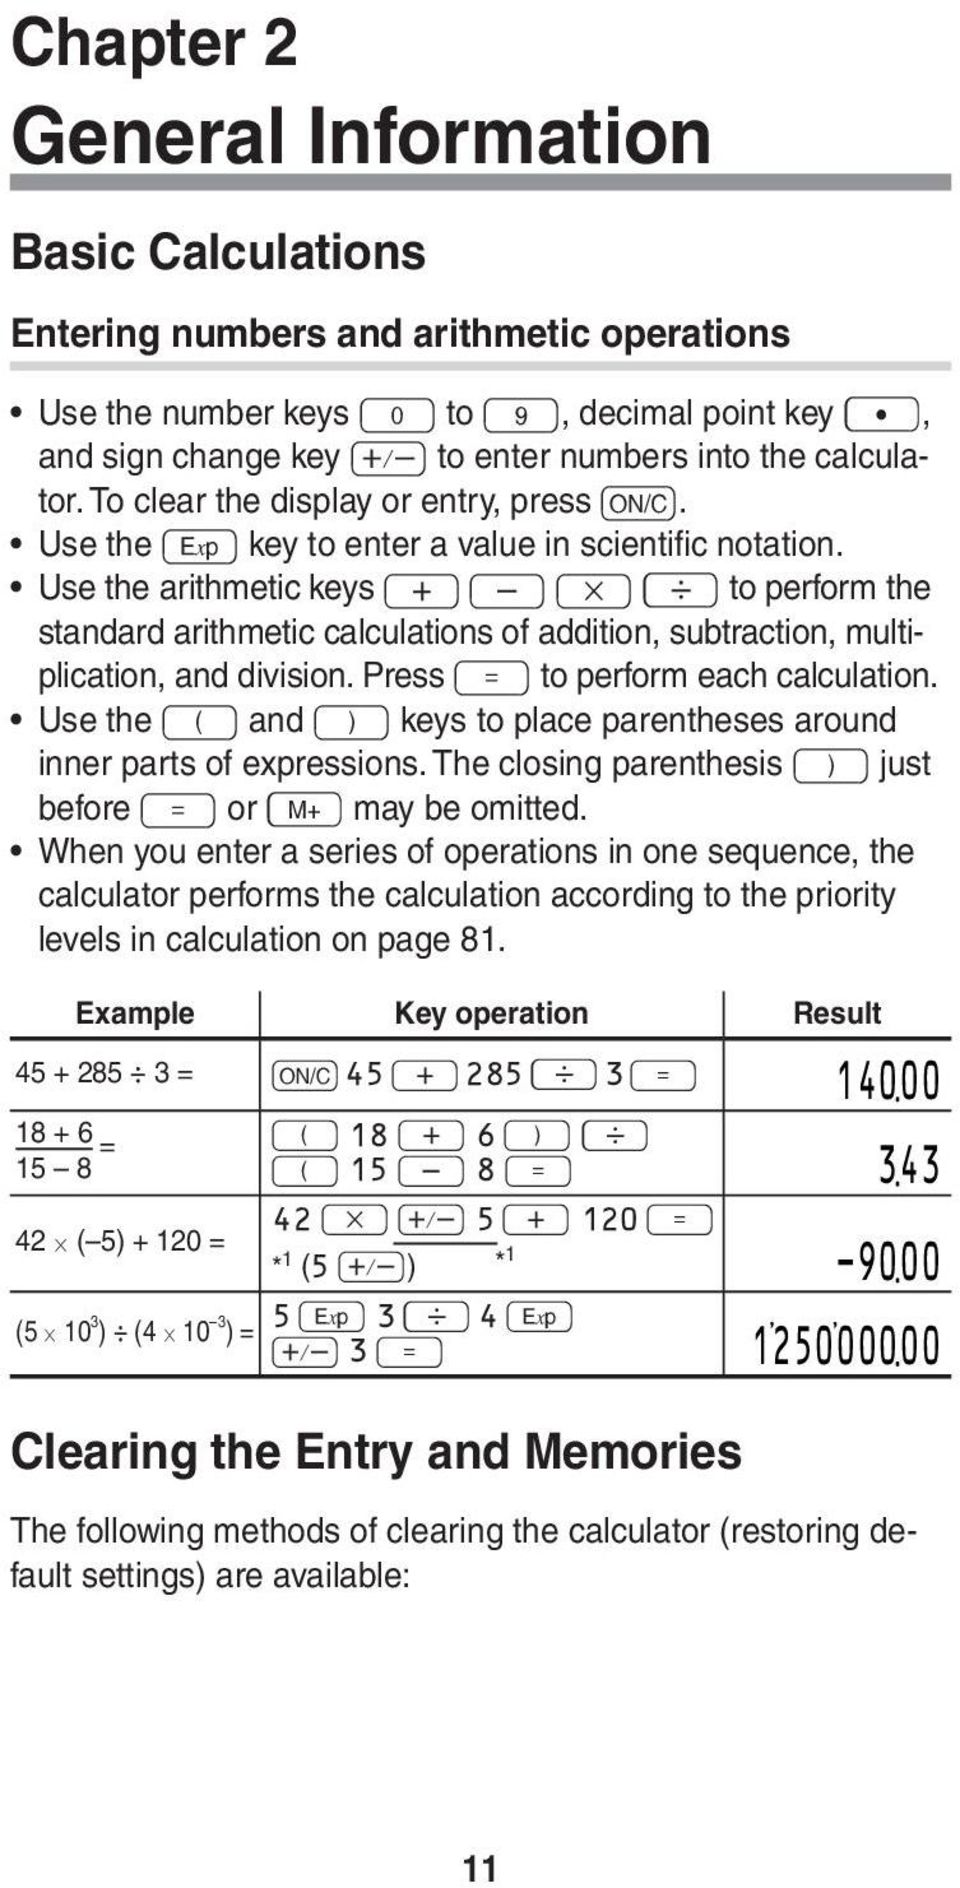 Use the arithmetic keys + - x 8 to perform the standard arithmetic calculations of addition, subtraction, multiplication, and division. Press = to perform each calculation.